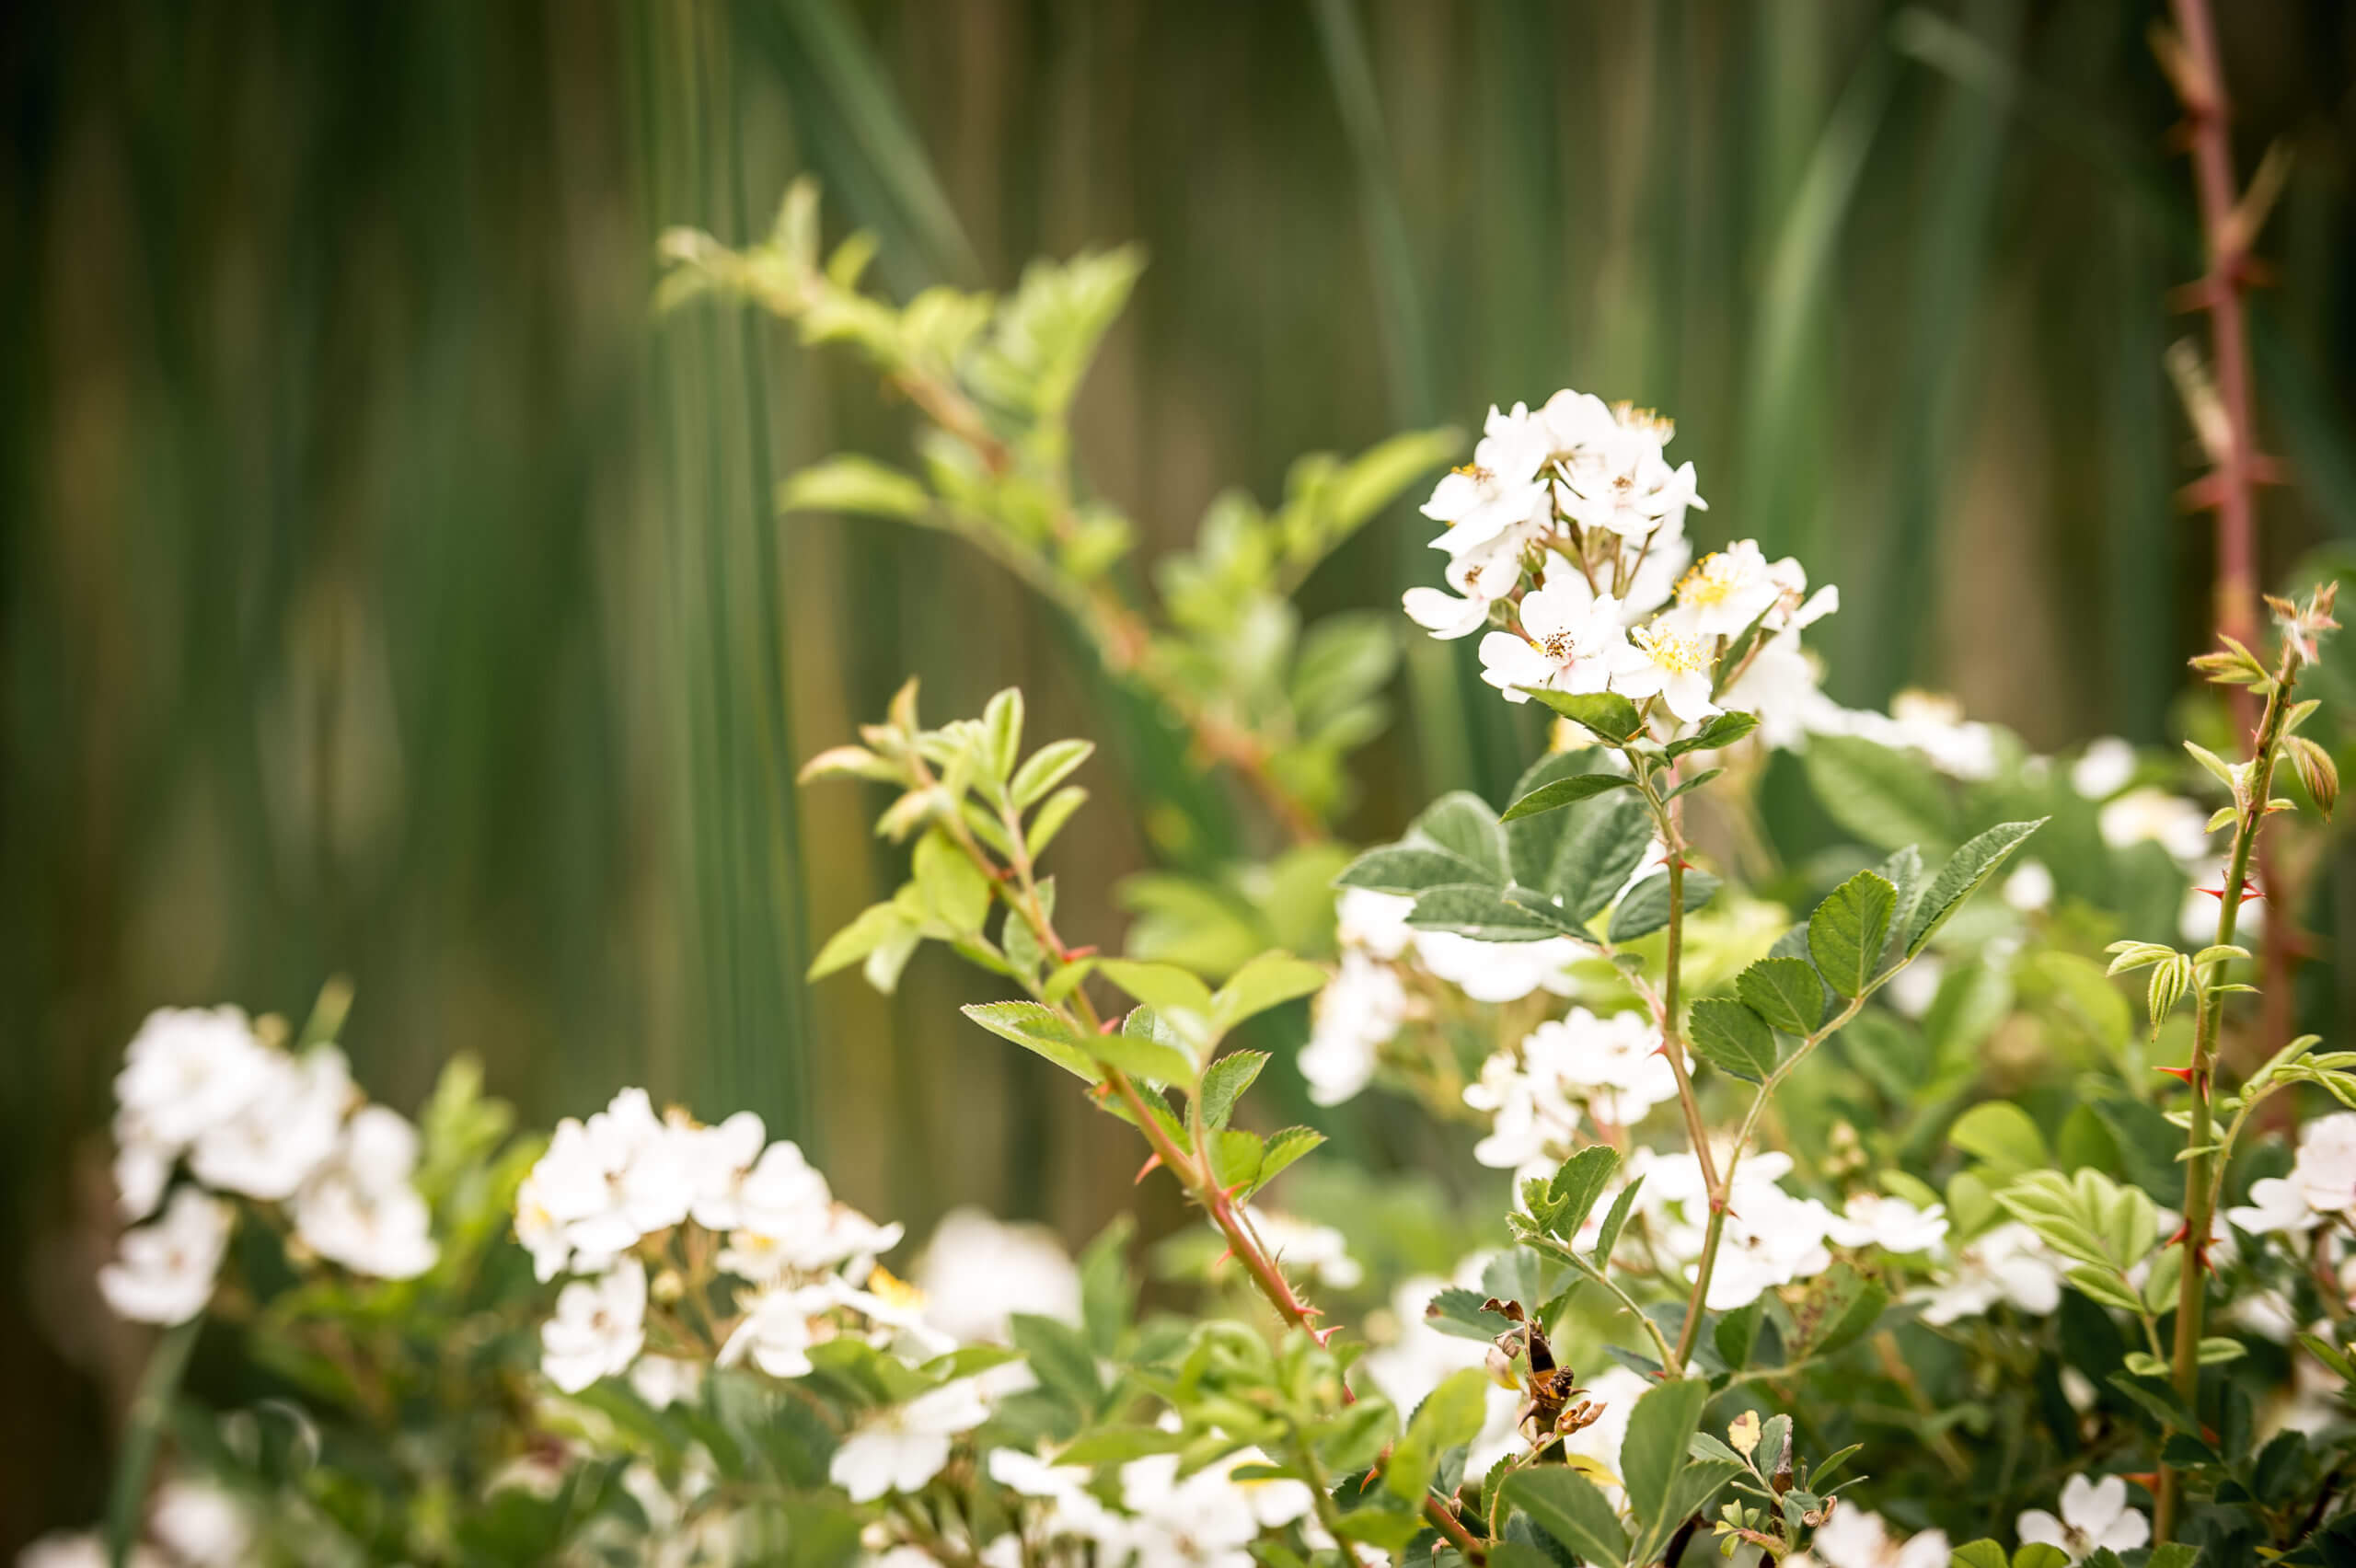 A bush with white blossoms.